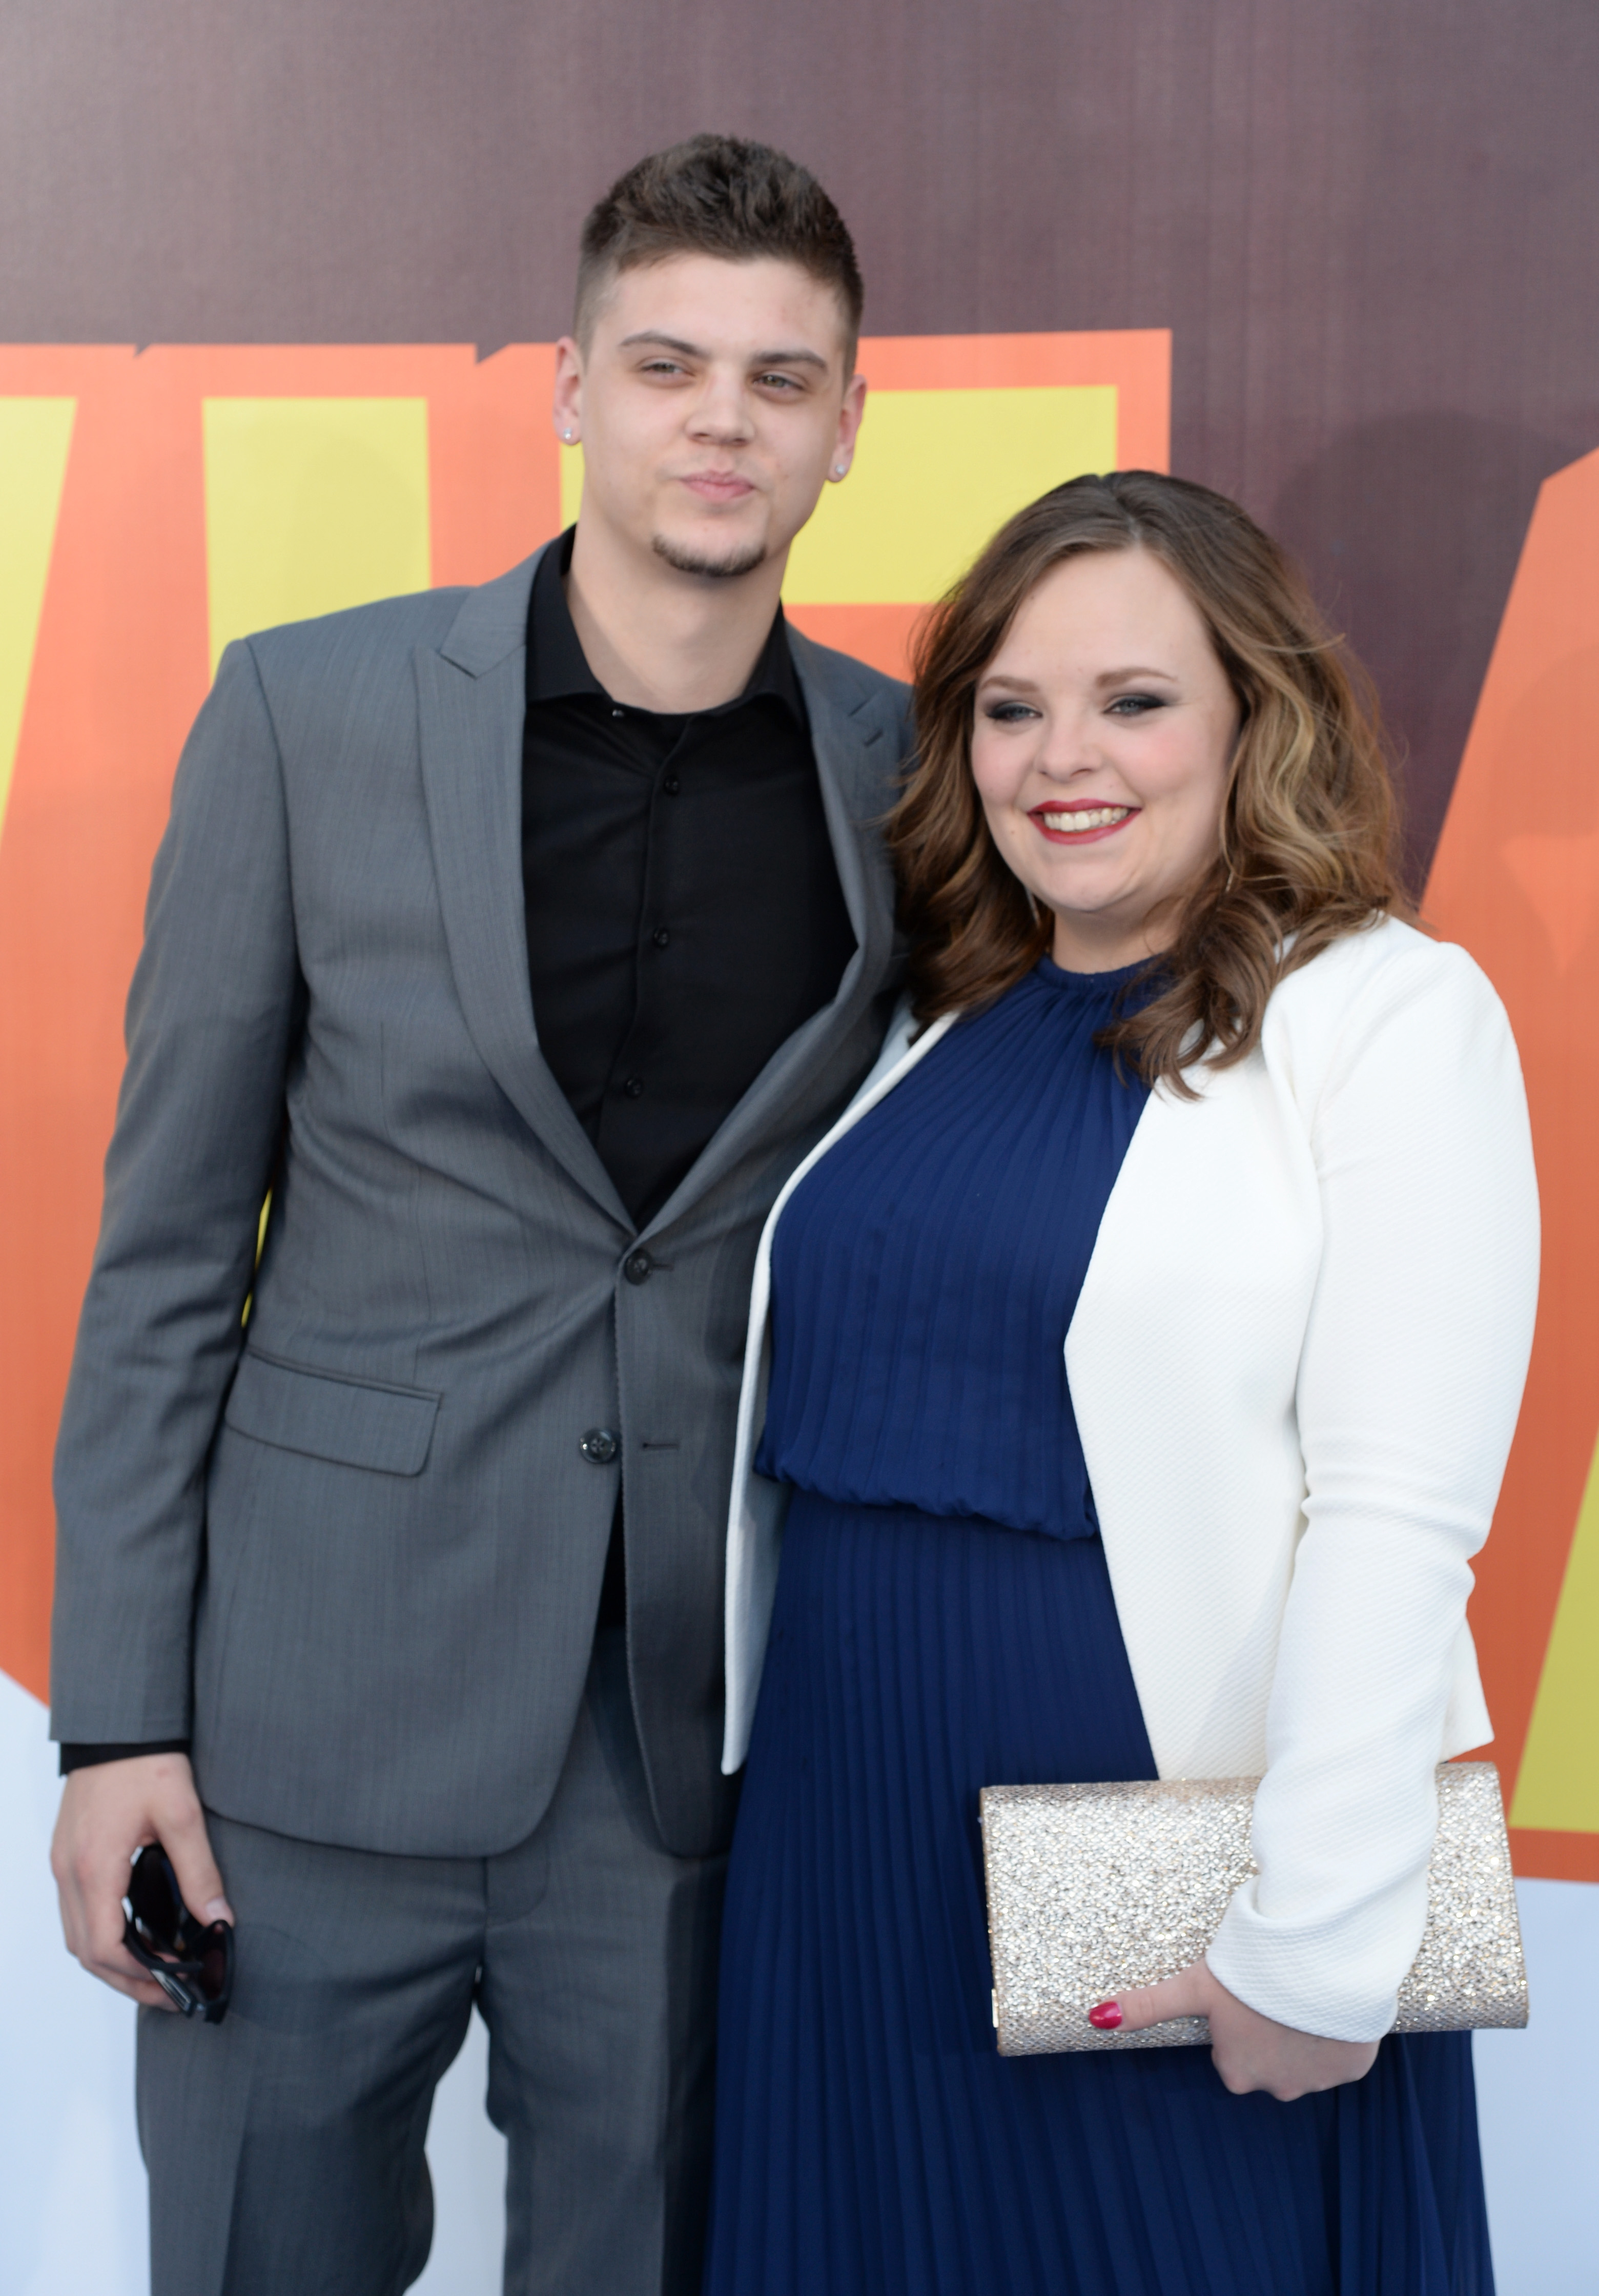 Catelynn and Tyler smile on the red carpet for photographers